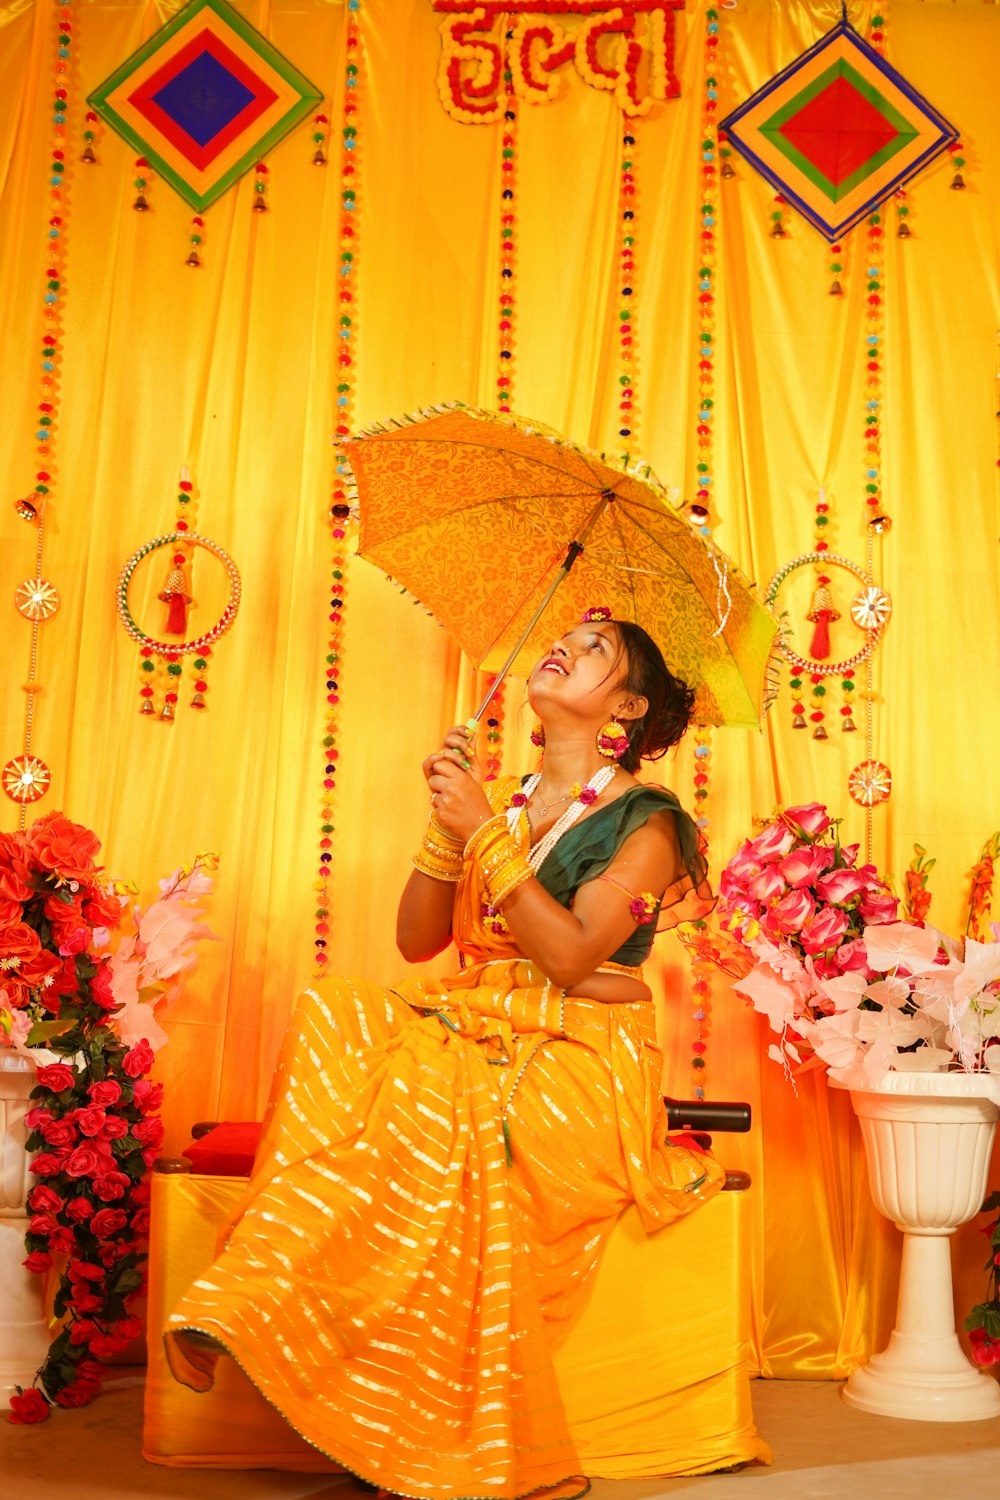 a woman in a yellow dress holding an umbrella